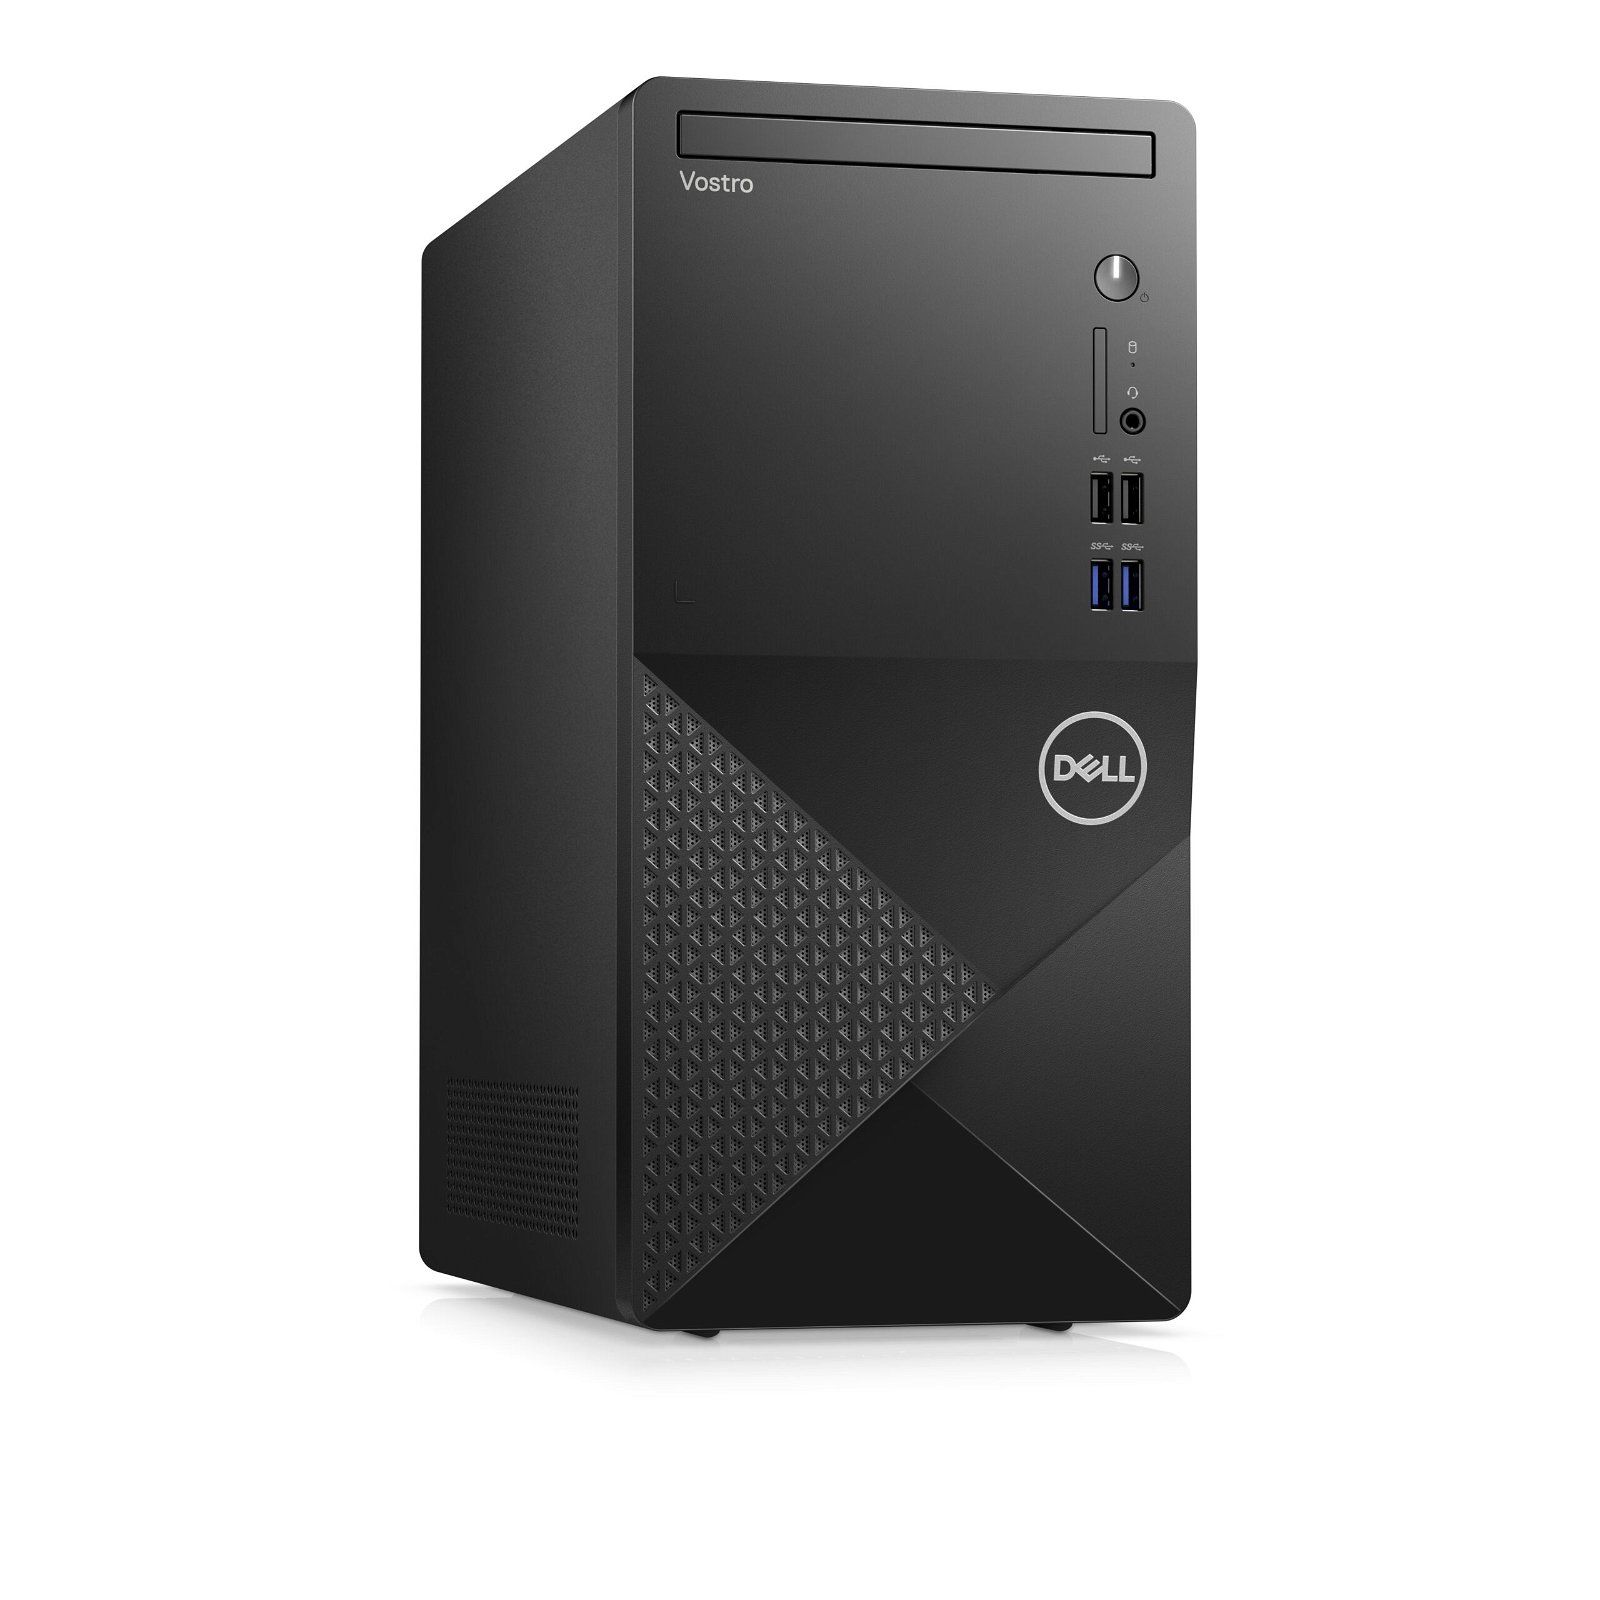 Desktop Vostro 3020 MT, 180W PSU Black Chassis (Silver Mesh) with TPM, 13th Gen Intel(R) Core(TM) i3-13100 processor (4-Core, 12MB Cache, 3.4 GHz to 4.5 GHz), Intel(R) UHD Graphics 730 with shared graphics memory , 8GB, 8Gx1, DDR4, 3200MHz, 256GB M.2 PCIe NVMe Solid State Drive, No Optical Drive_3